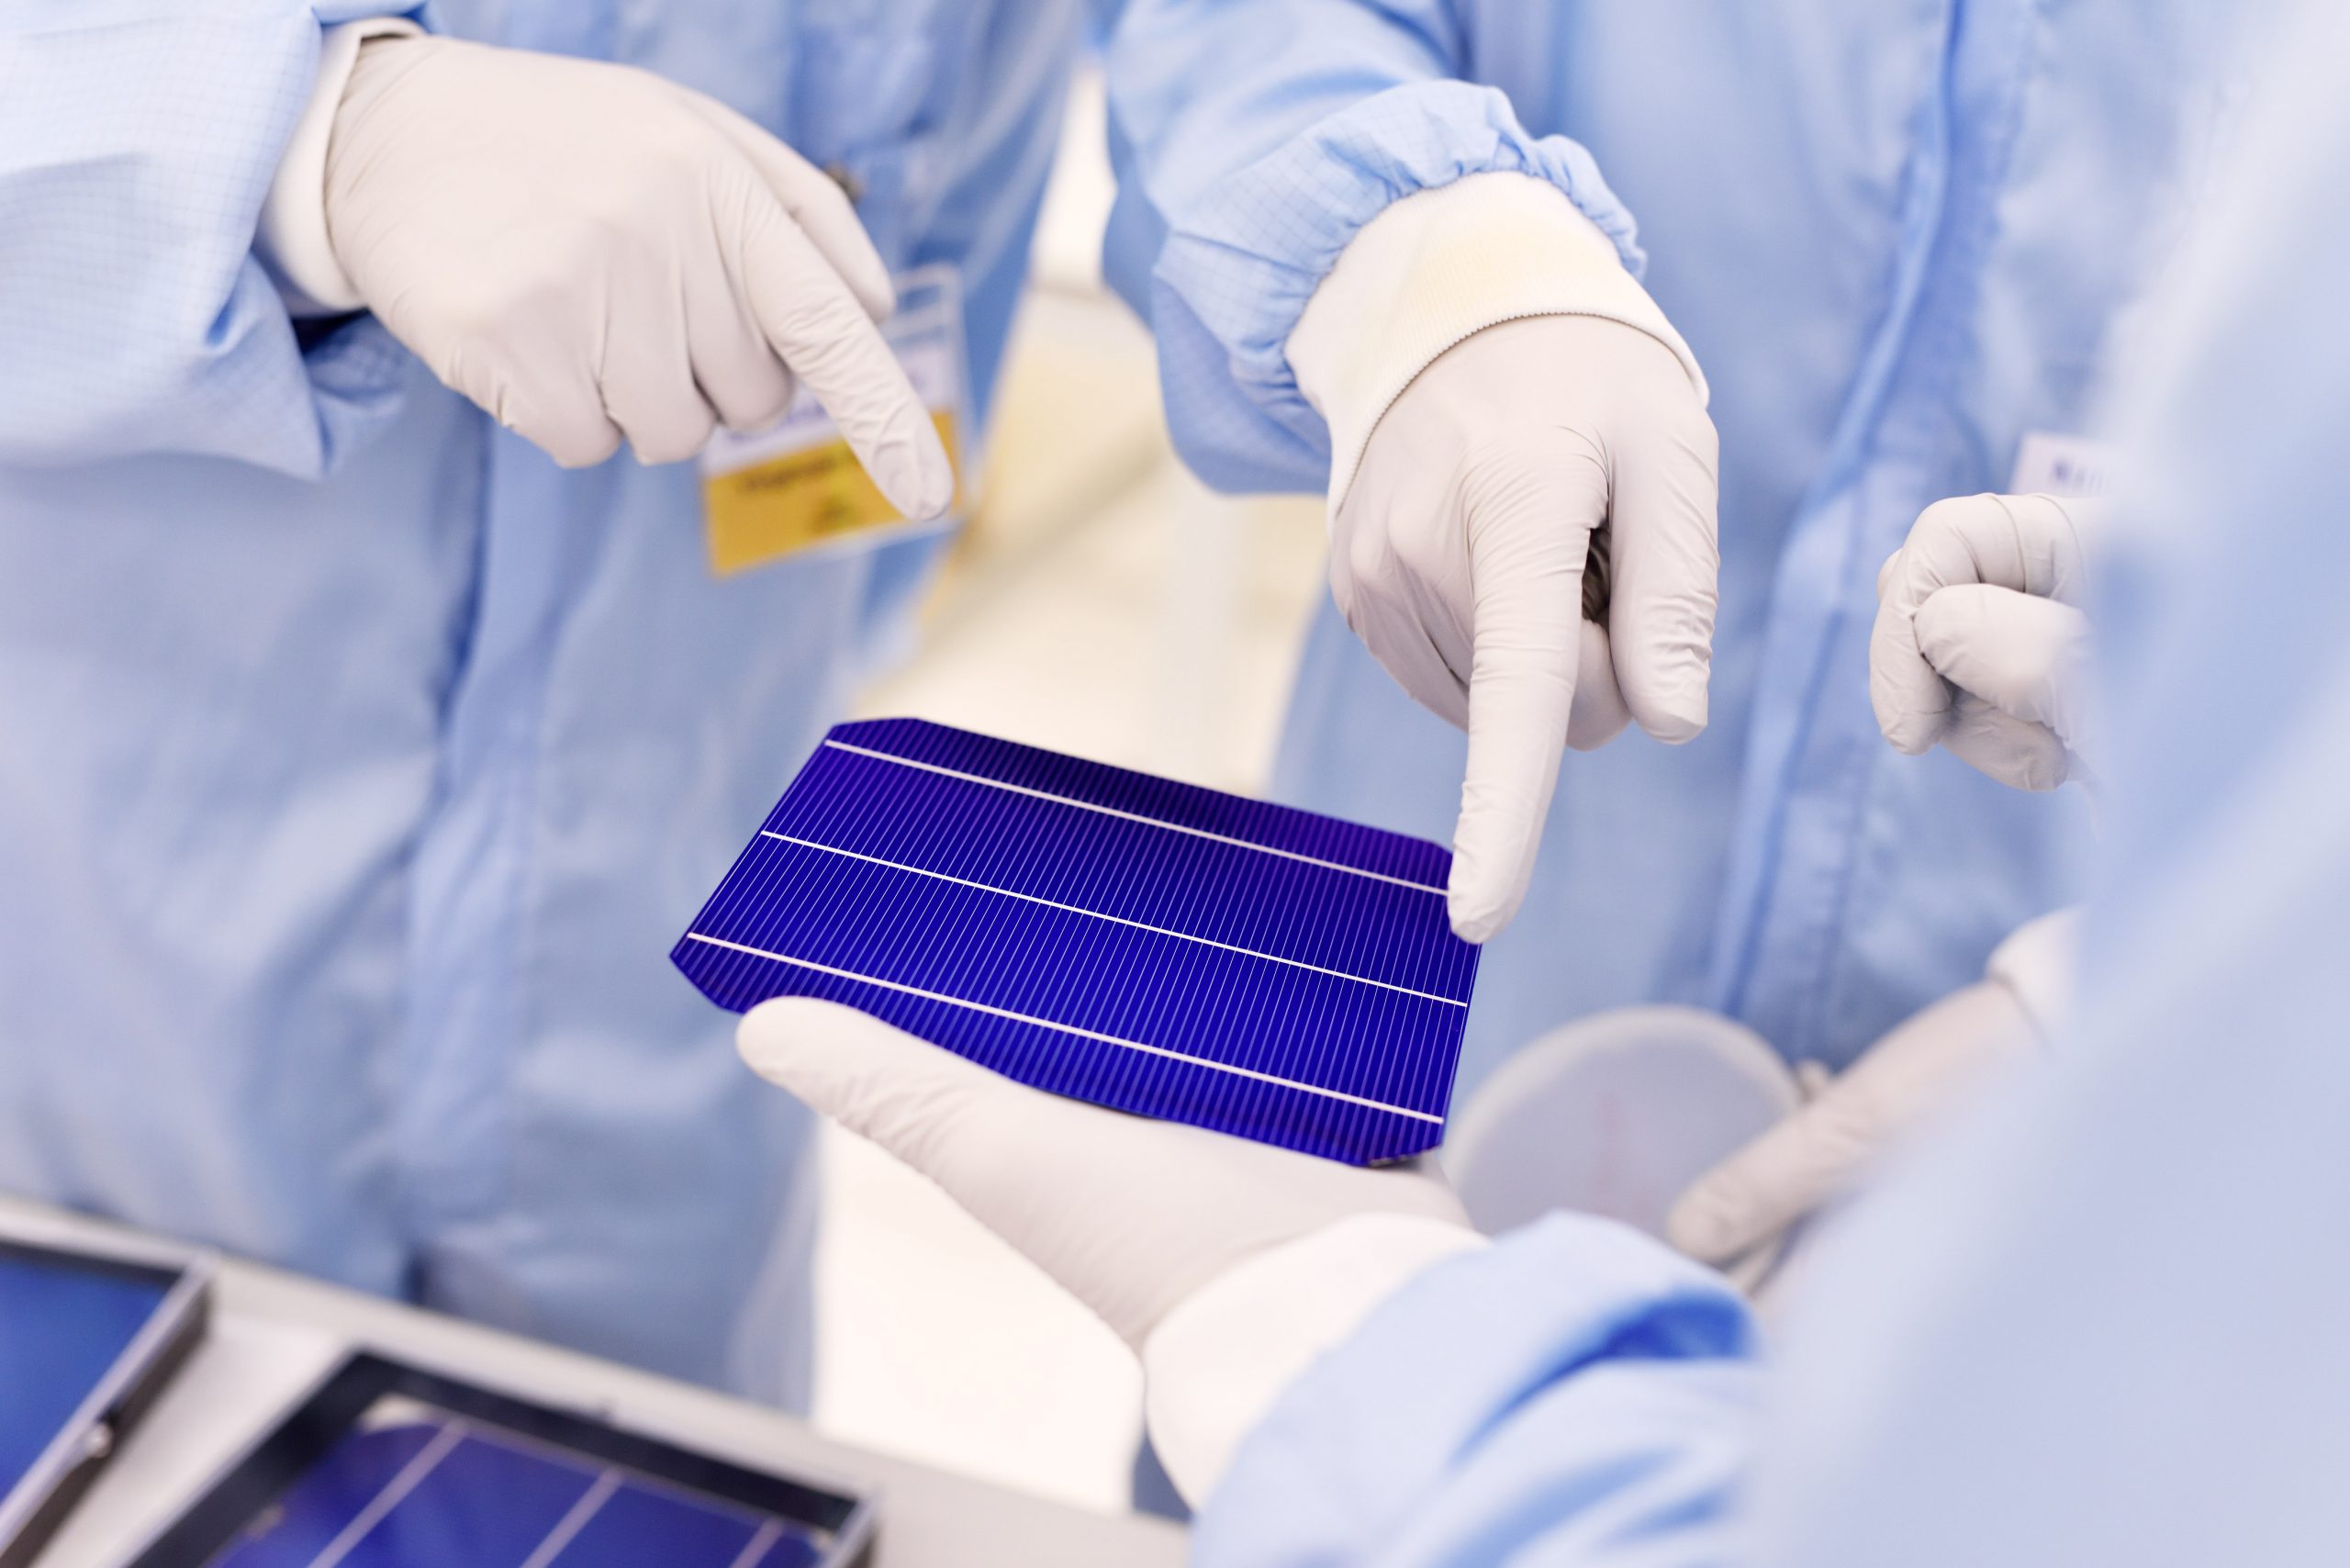 solar cell in cleanroom, solarlab / plasmalab - prof. Erwin Kessels, Applied Physics, Eindhoven University of Technology